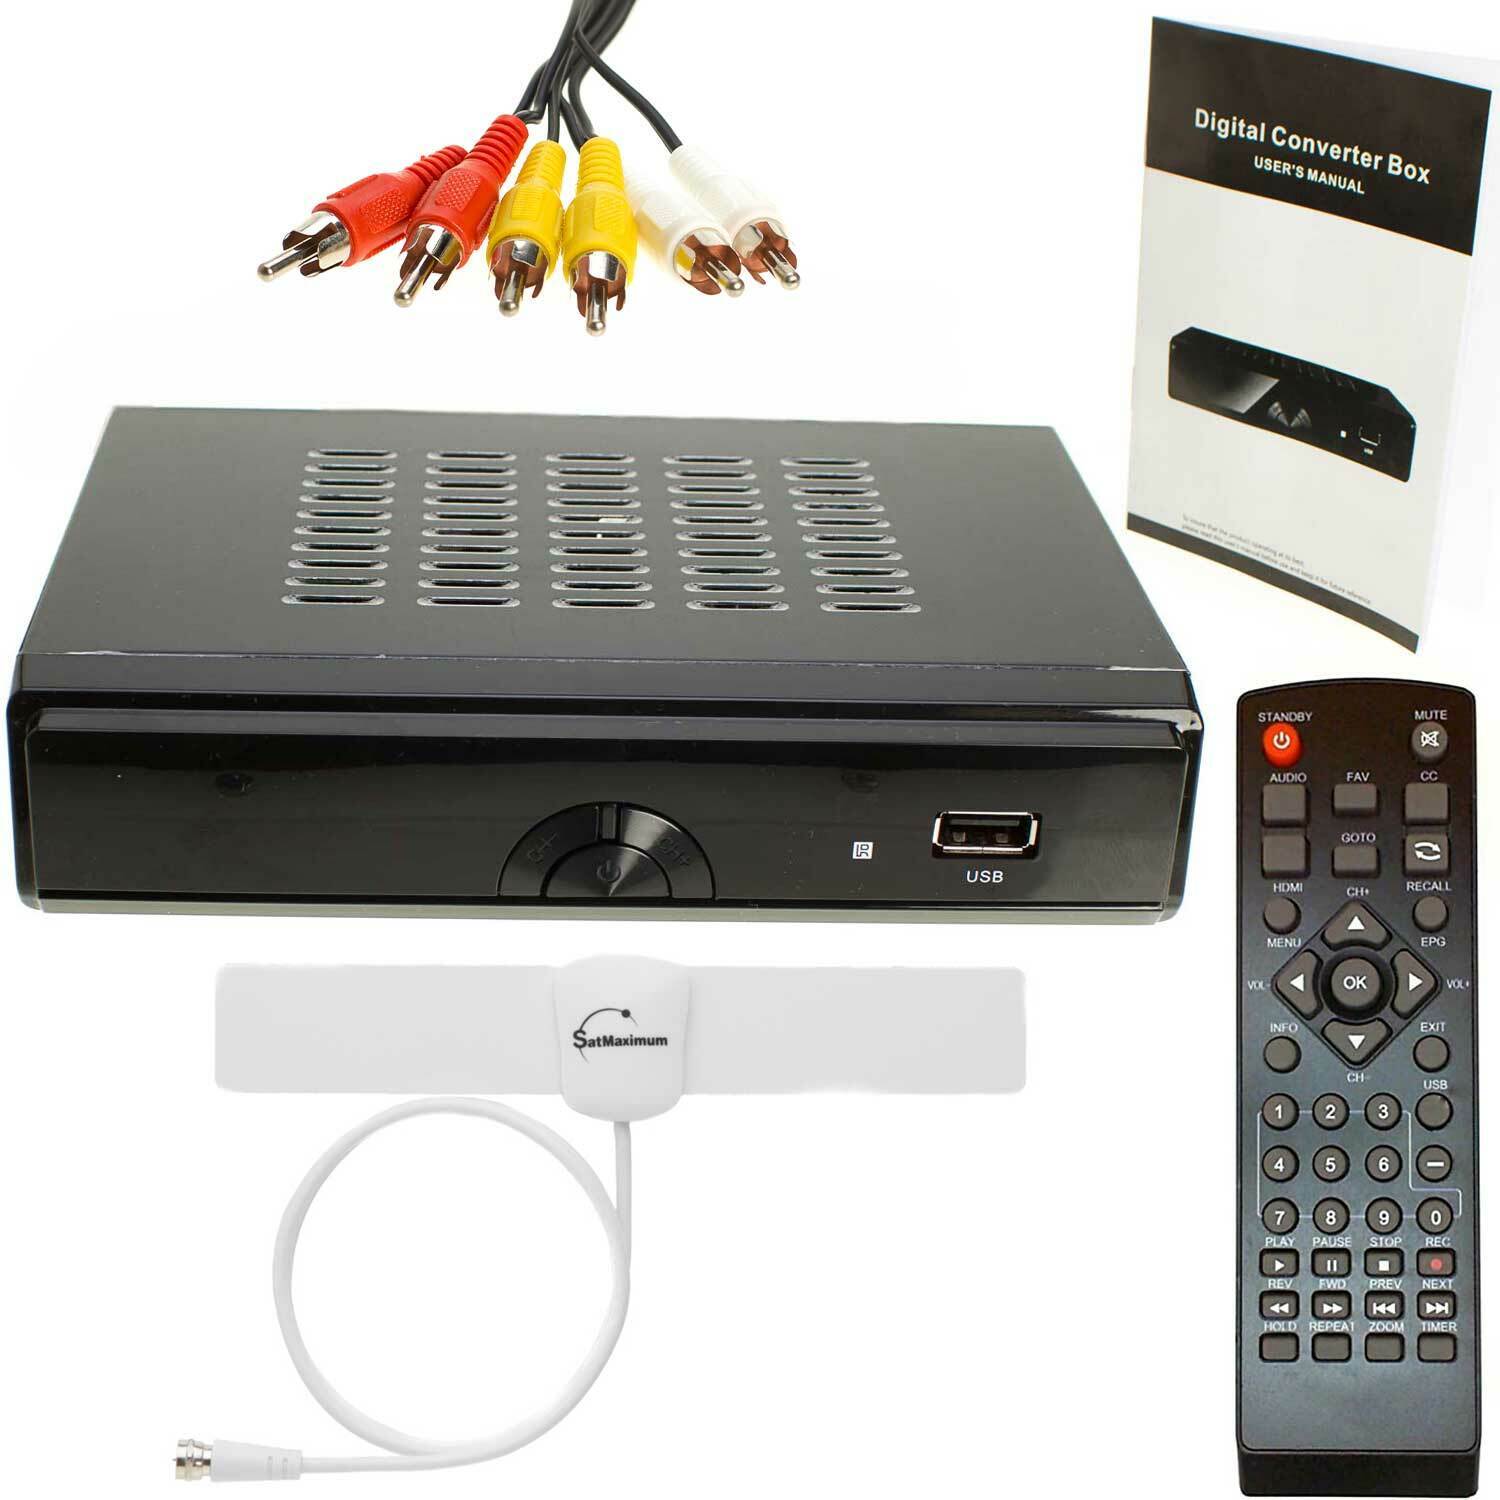 Digital Converter Box HDTV for TV HDMI Cable Remote View Recording With Antenna 